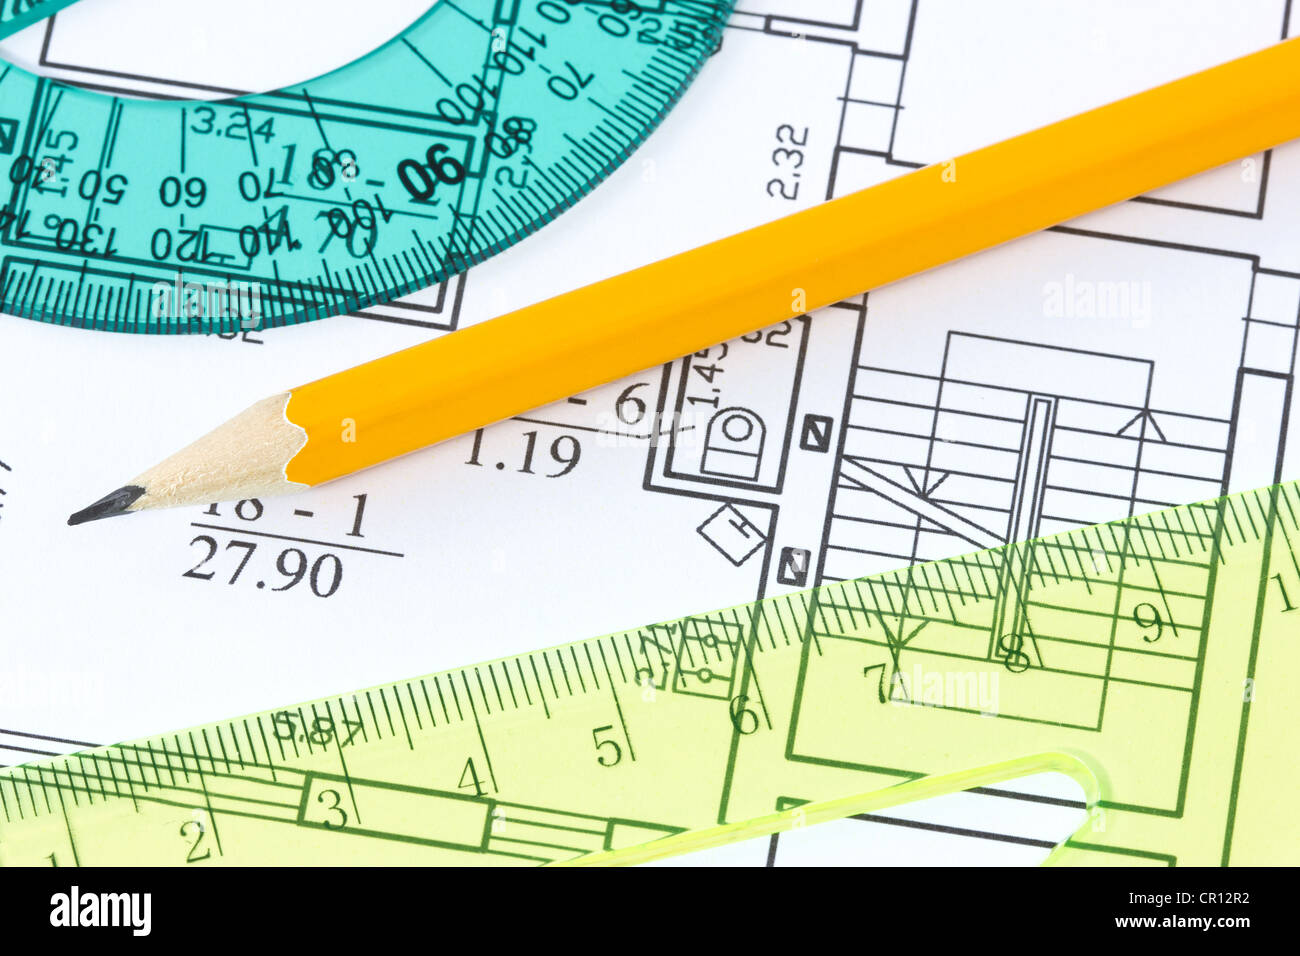 Architecture Drawingswith Pencil And Ruler Stock Photo - Download